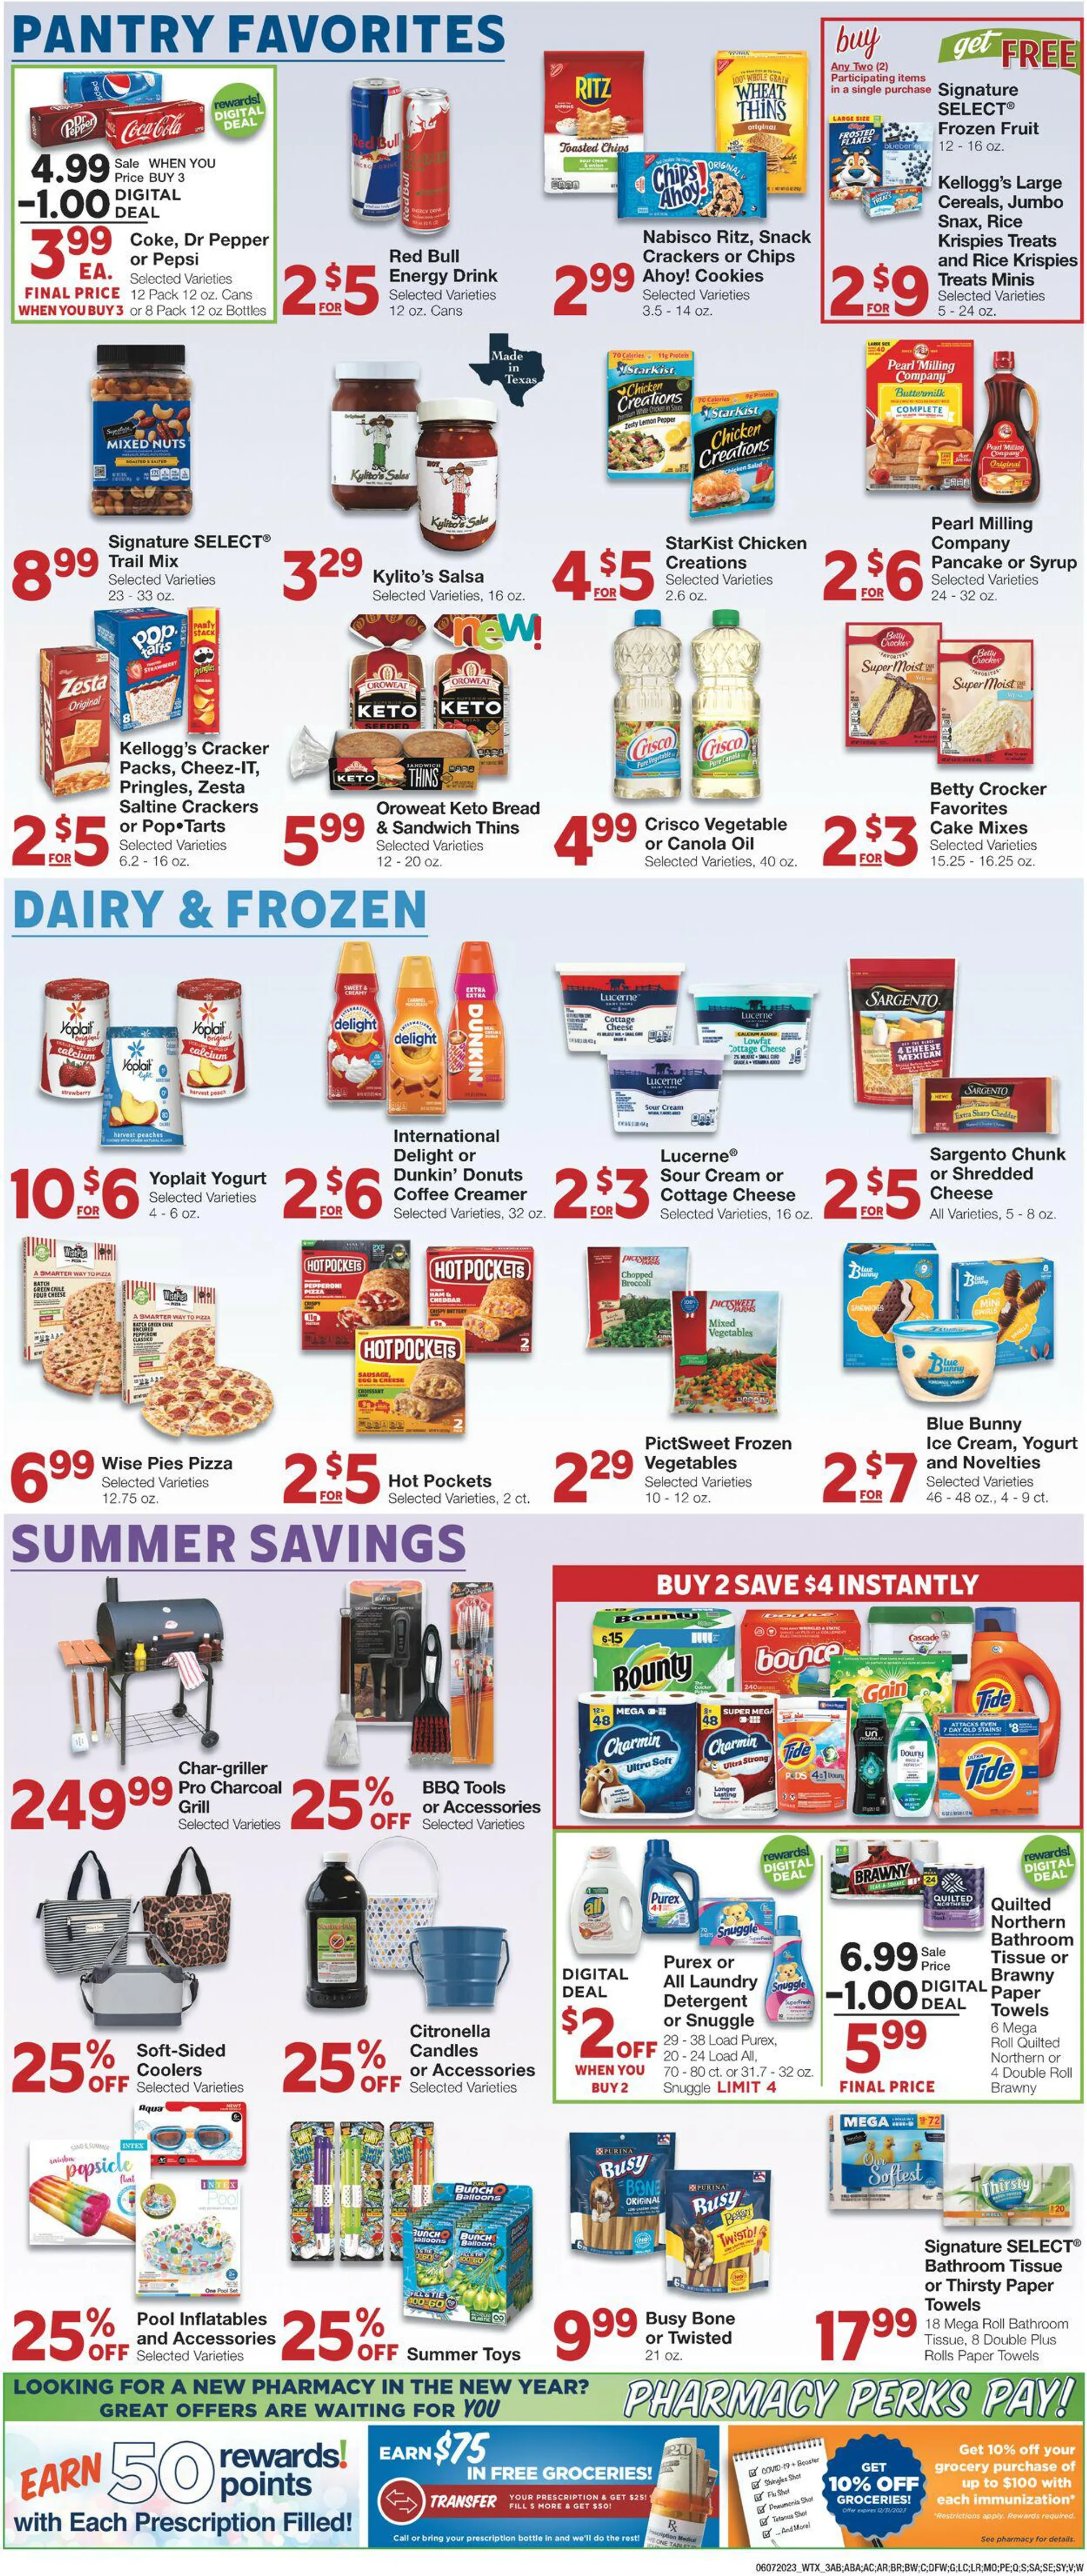 United Supermarkets Current weekly ad - 3